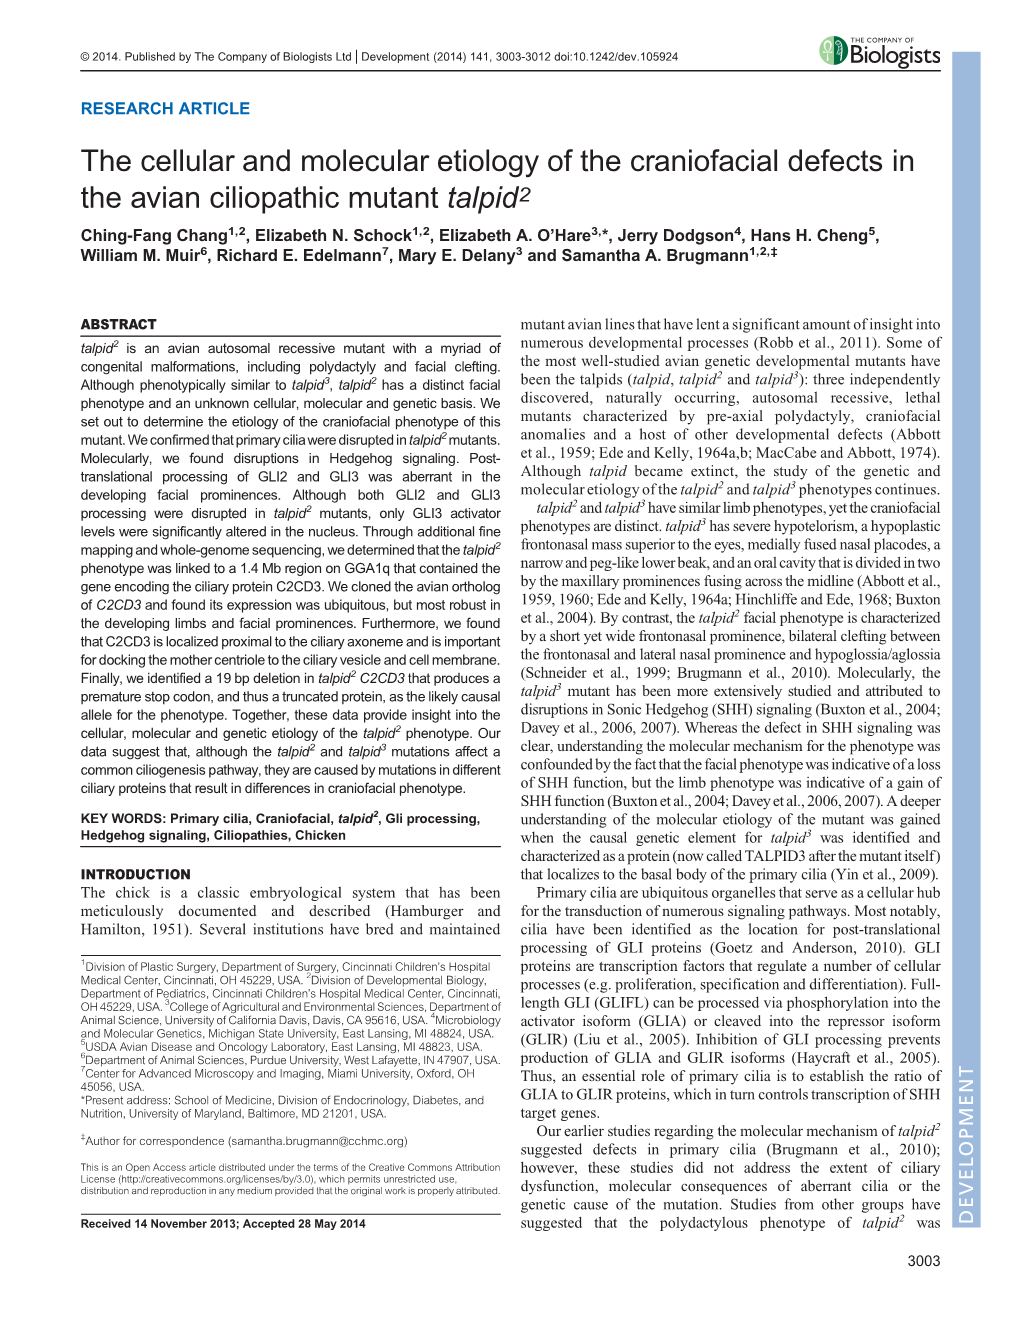 The Cellular and Molecular Etiology of the Craniofacial Defects in the Avian Ciliopathic Mutant Talpid2 Ching-Fang Chang1,2, Elizabeth N